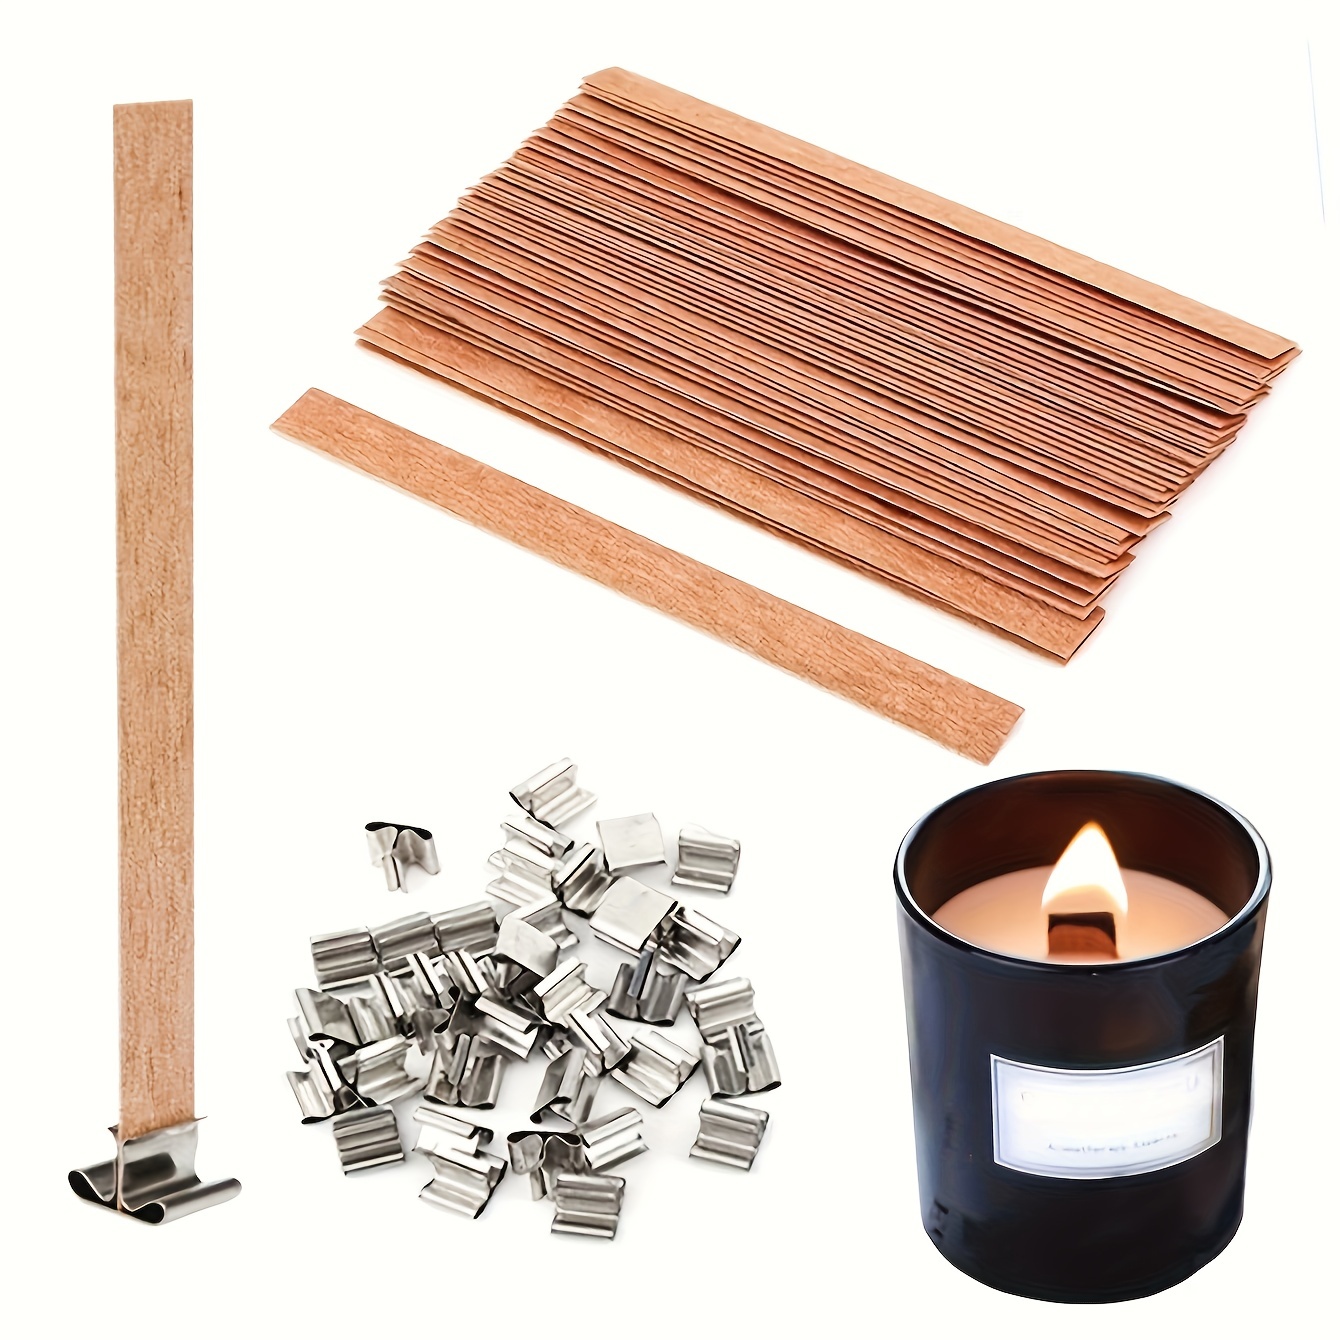 40Pcs/set DIY Wooden Candle Wicks Core Sustainer For Candle Making